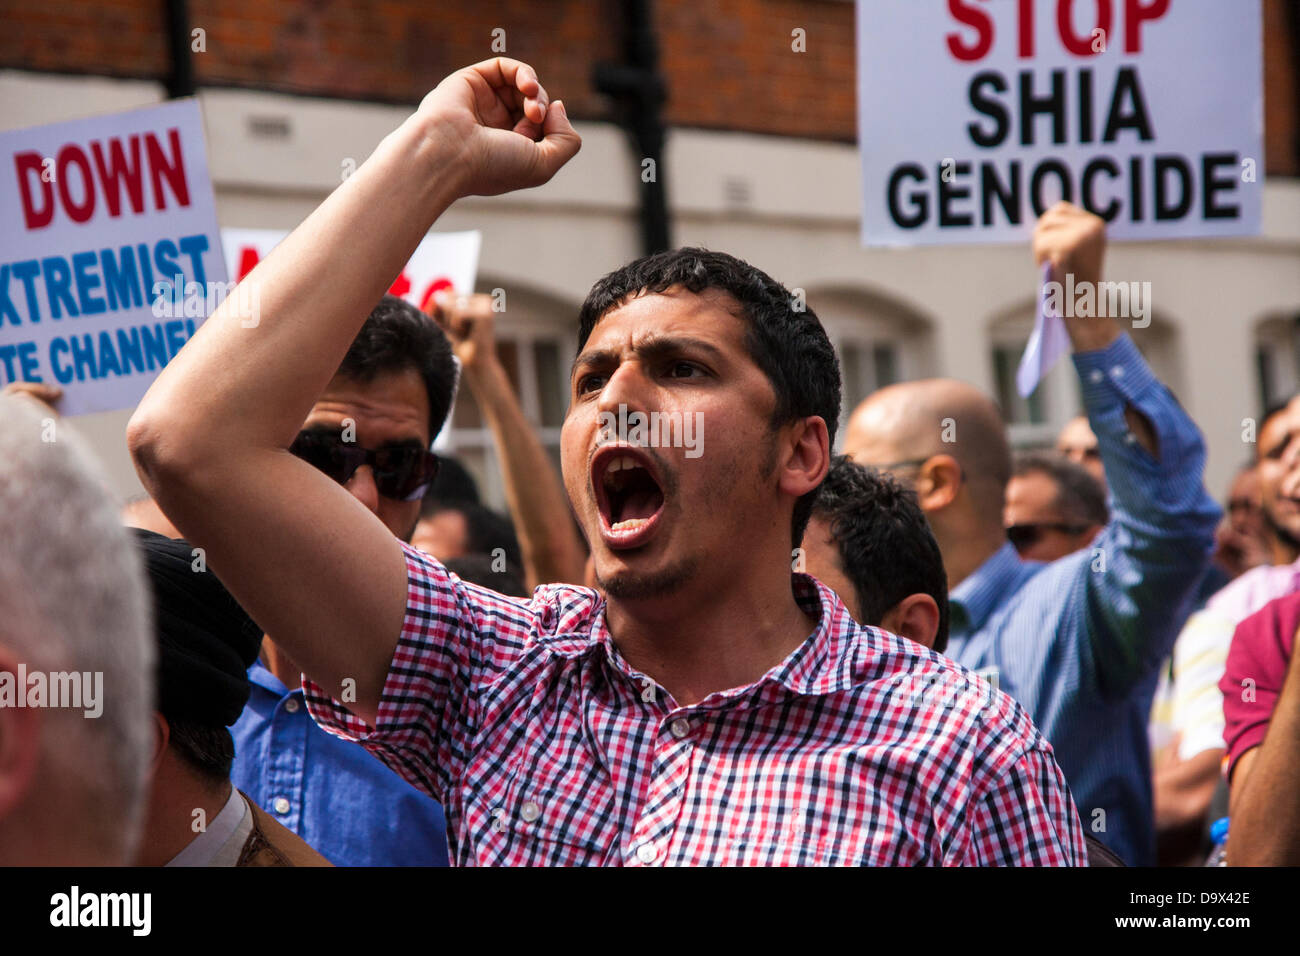 London, UK. 27th June 2013. A demonstrator yells slogans as Egyptians in London protest against sectarian killings in Egypt. Credit:  Paul Davey/Alamy Live News Stock Photo